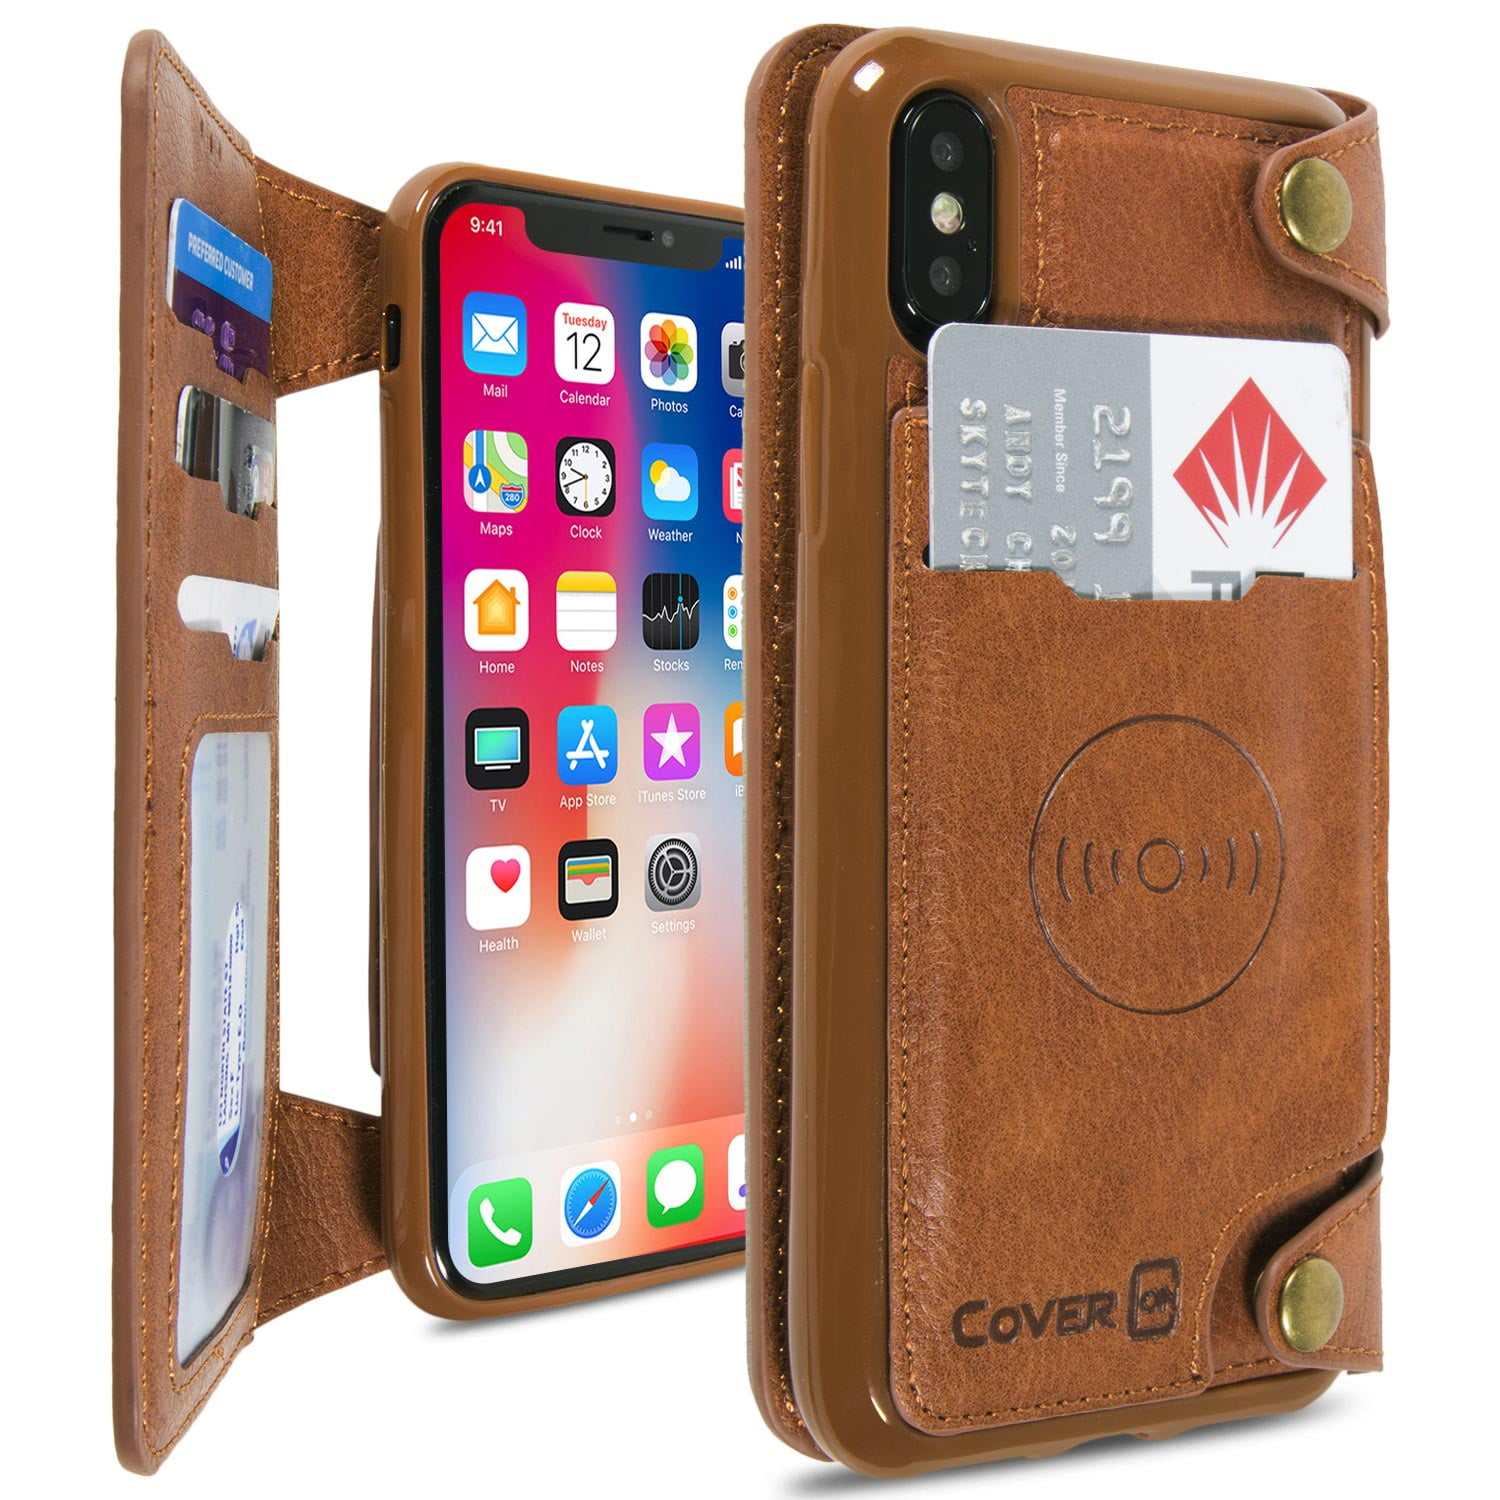 iPhone Xs Flip Case Cover for Leather Card Holders Extra-Protective Business Kickstand Cell Phone case Flip Cover